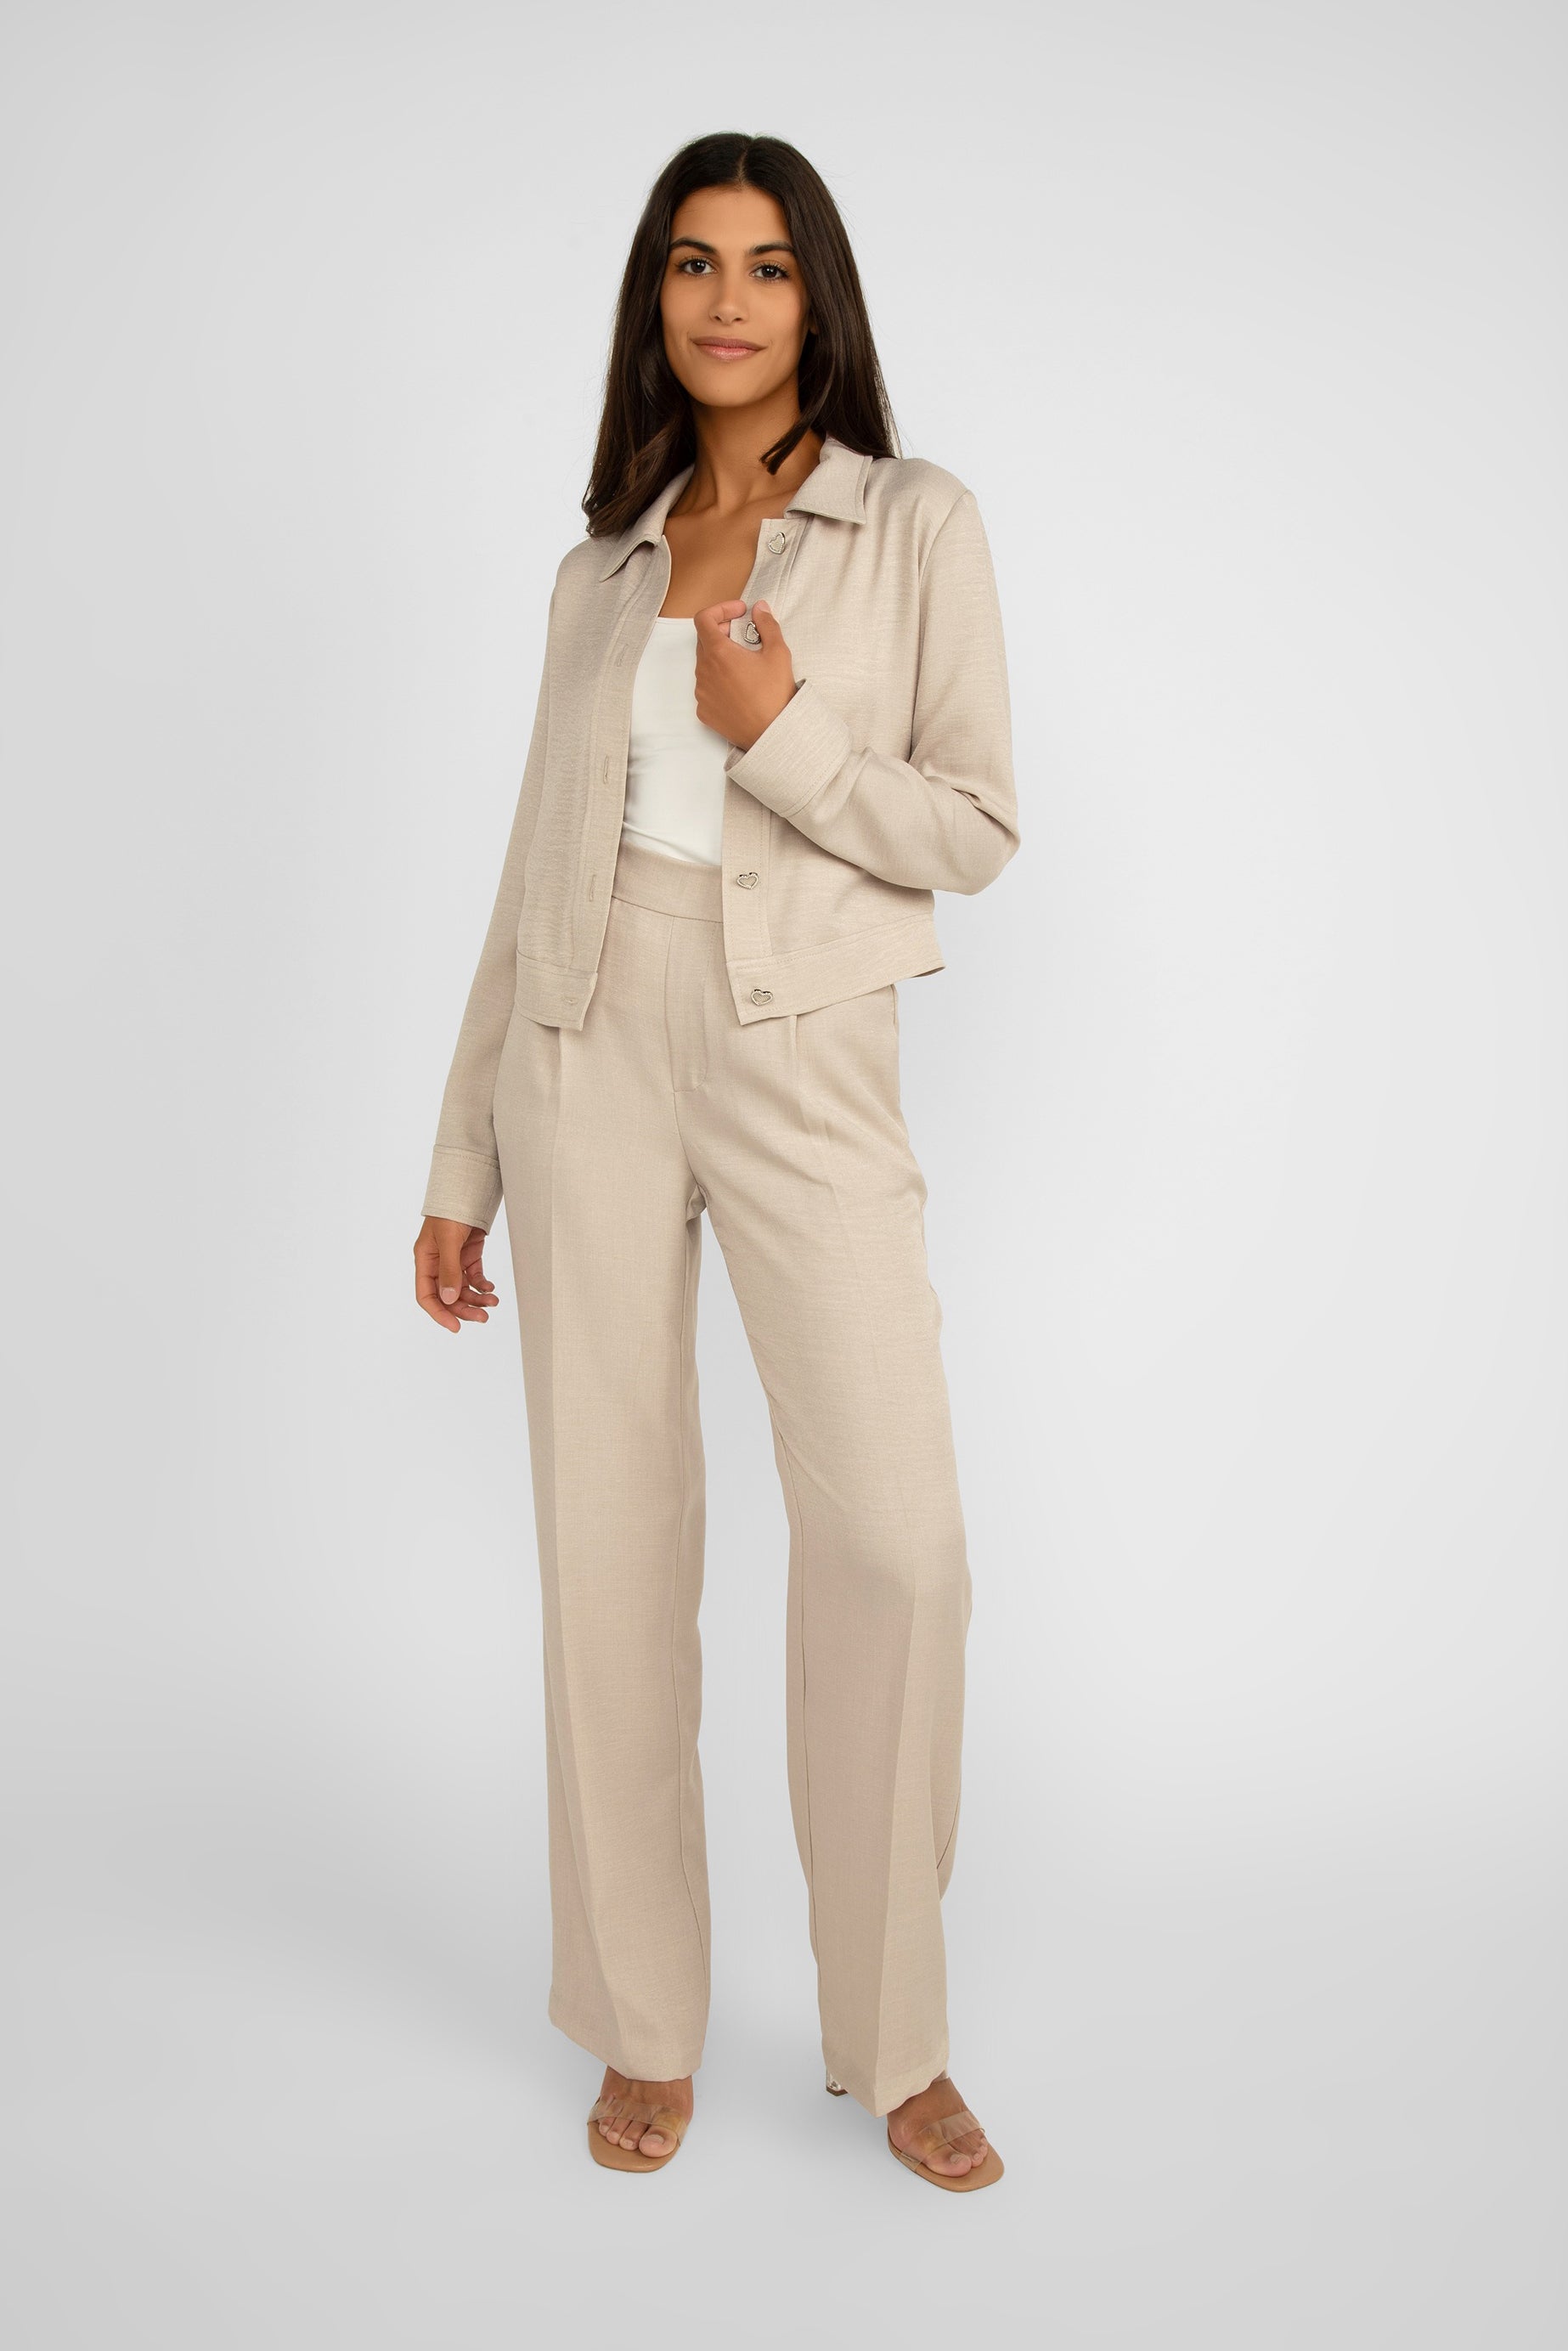 Frank Lyman (246337) Women's Long Sleeve, Button Front, Cropped Jacket with Collar in Oatmeal beige